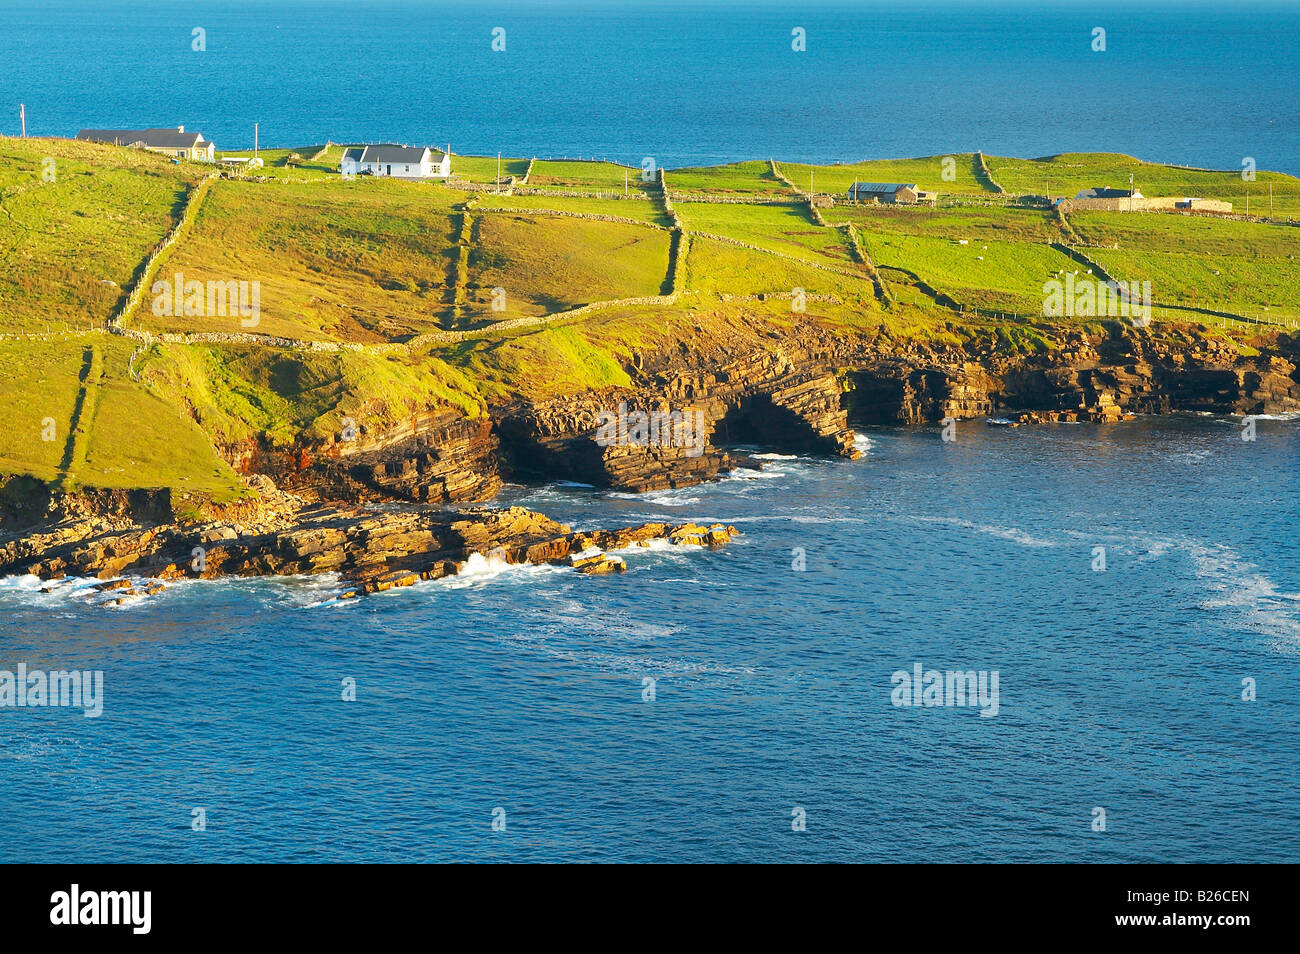 Outdoor-Foto, Muckros Head, Donegal Bay, County Donegal, Irland, Europa Stockfoto